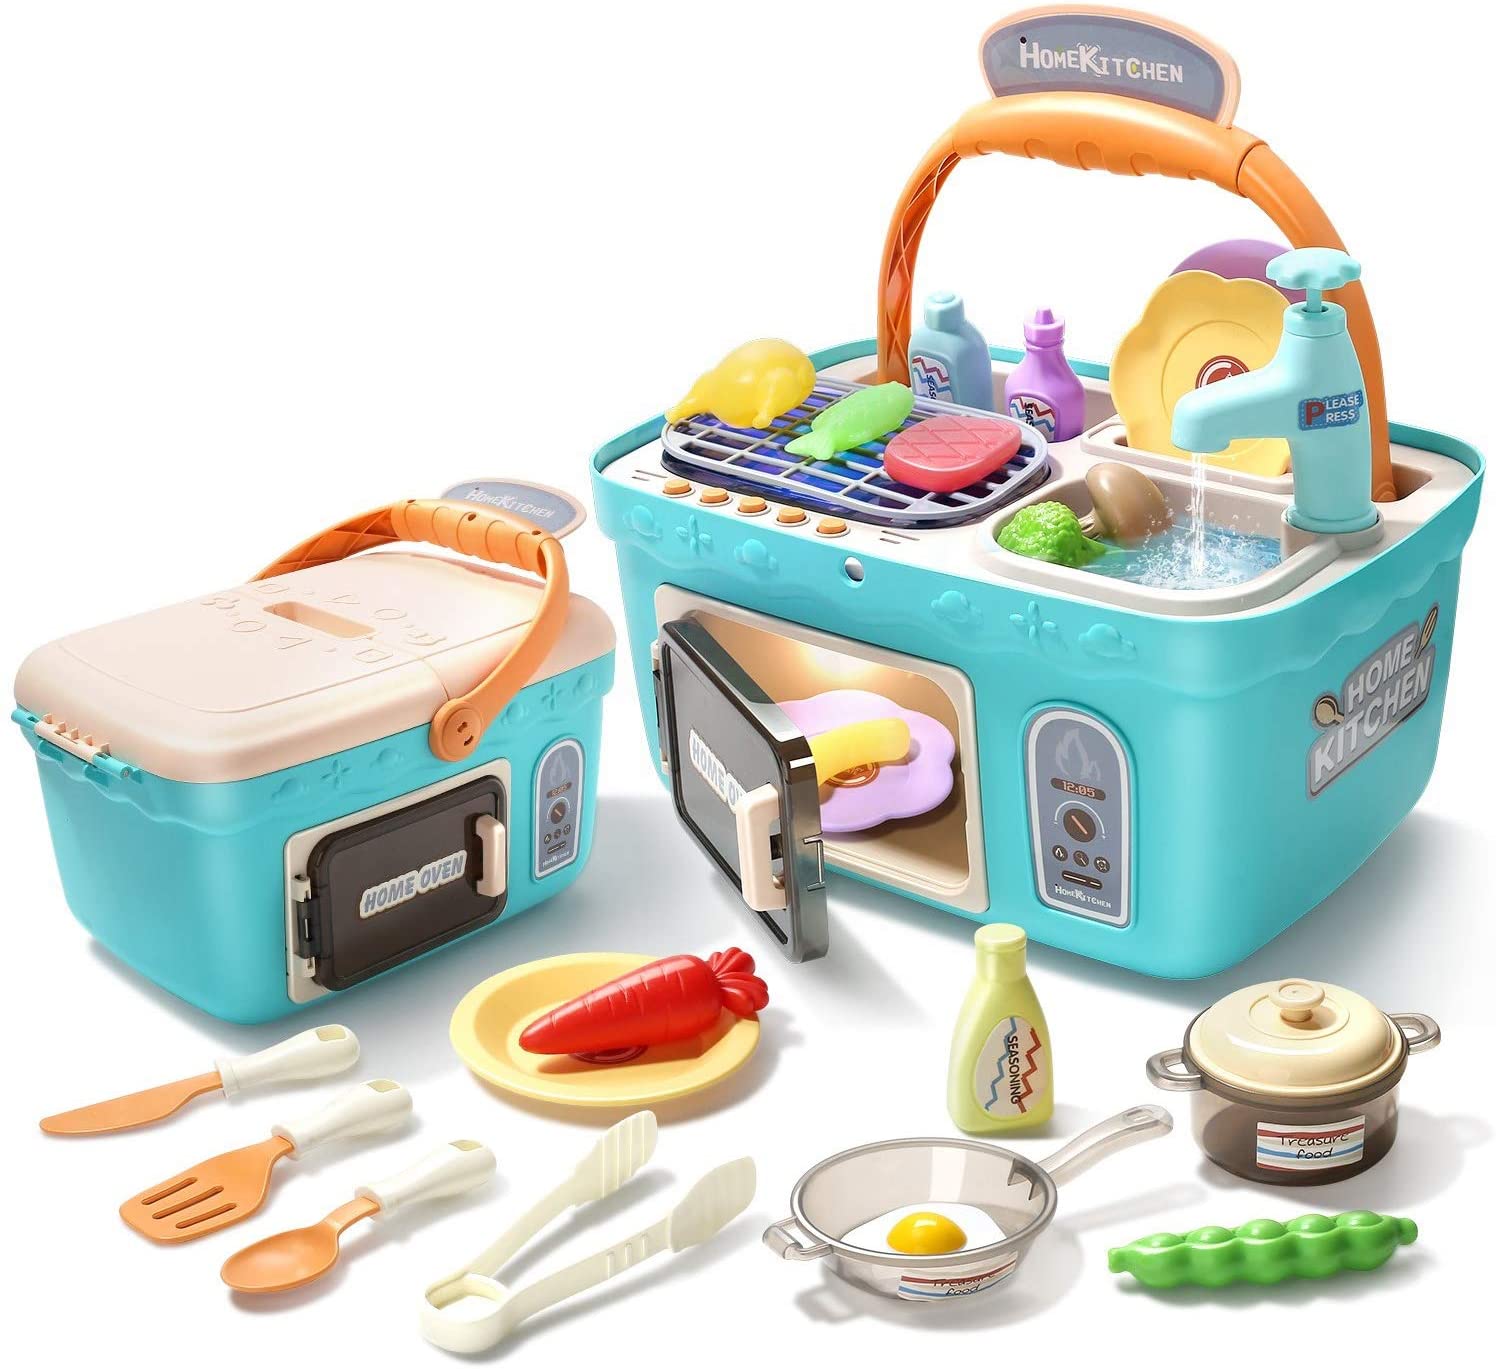 CUTE STONE Mini Electronic Play Kitchen For Kids